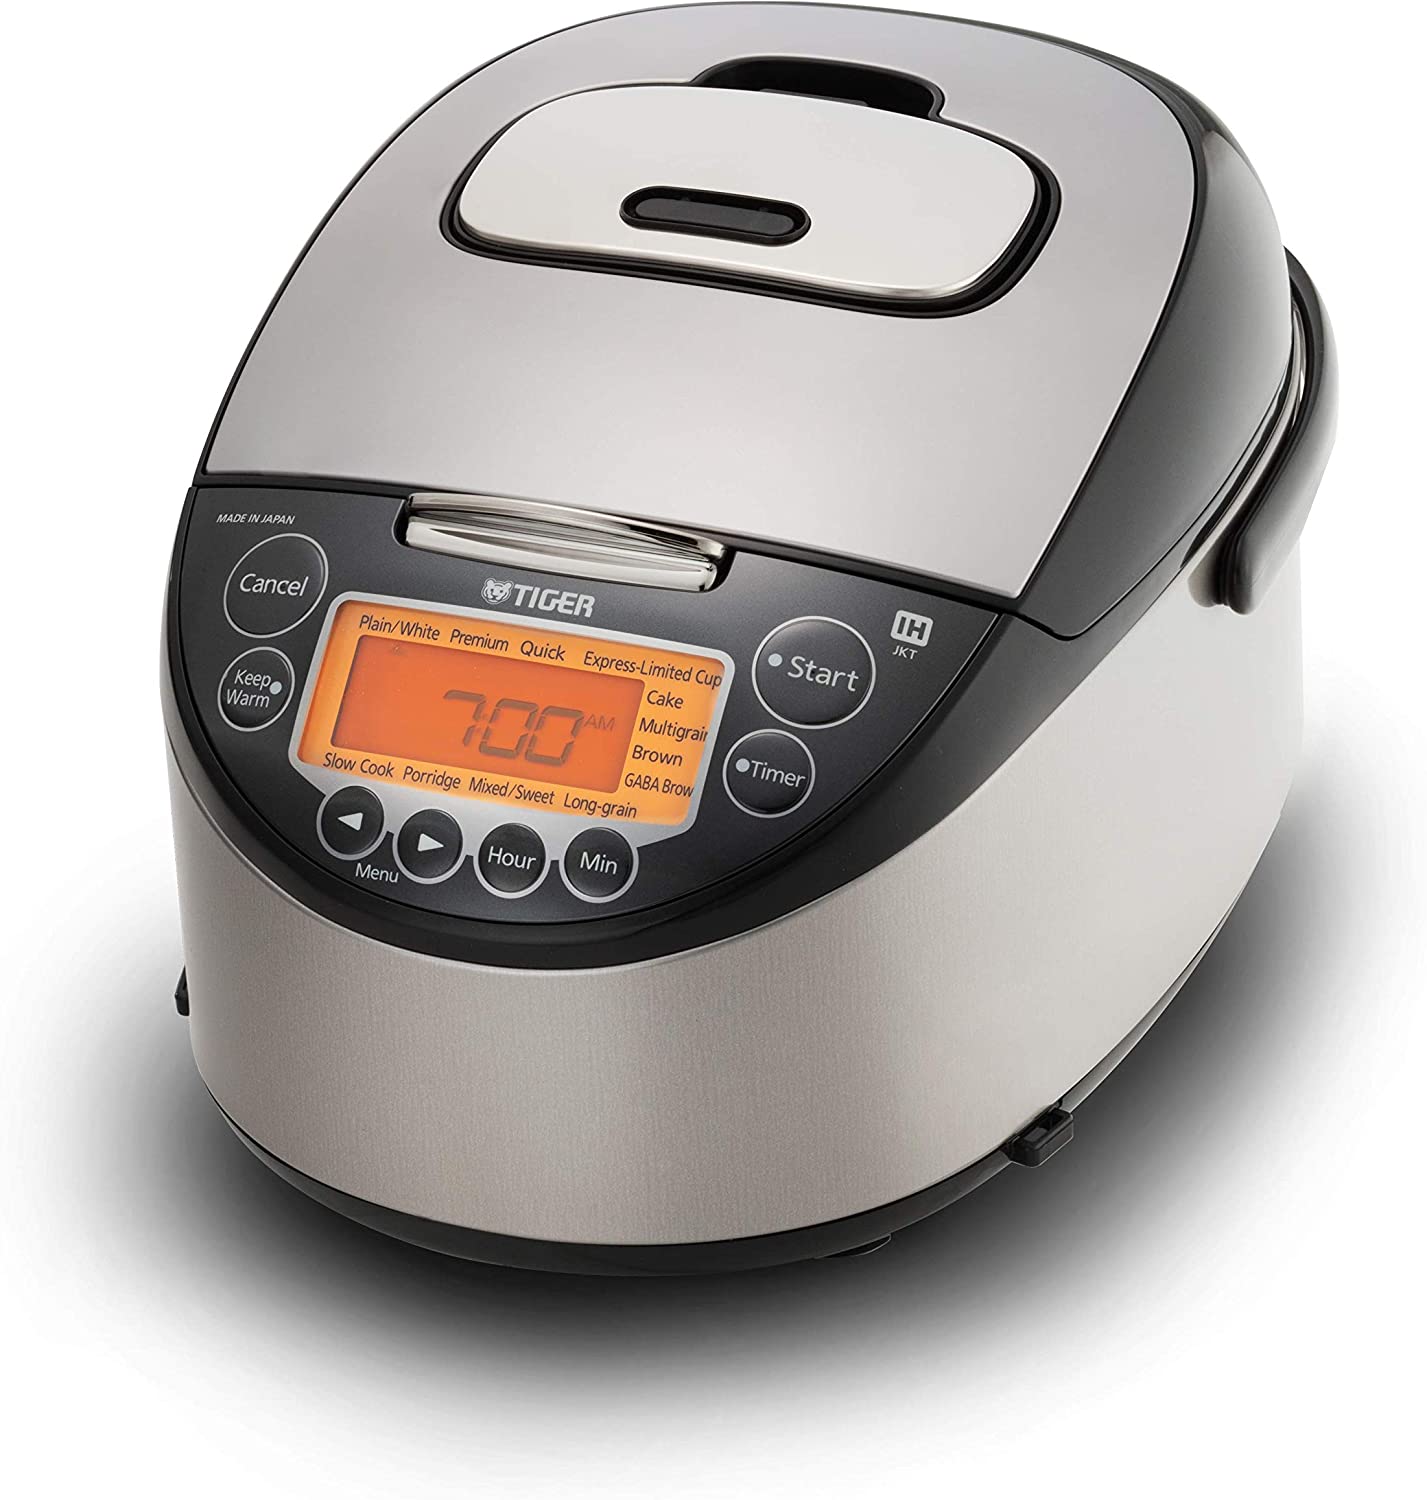 Tiger Rice Cooker IH, 5.5-Cup (Uncooked)